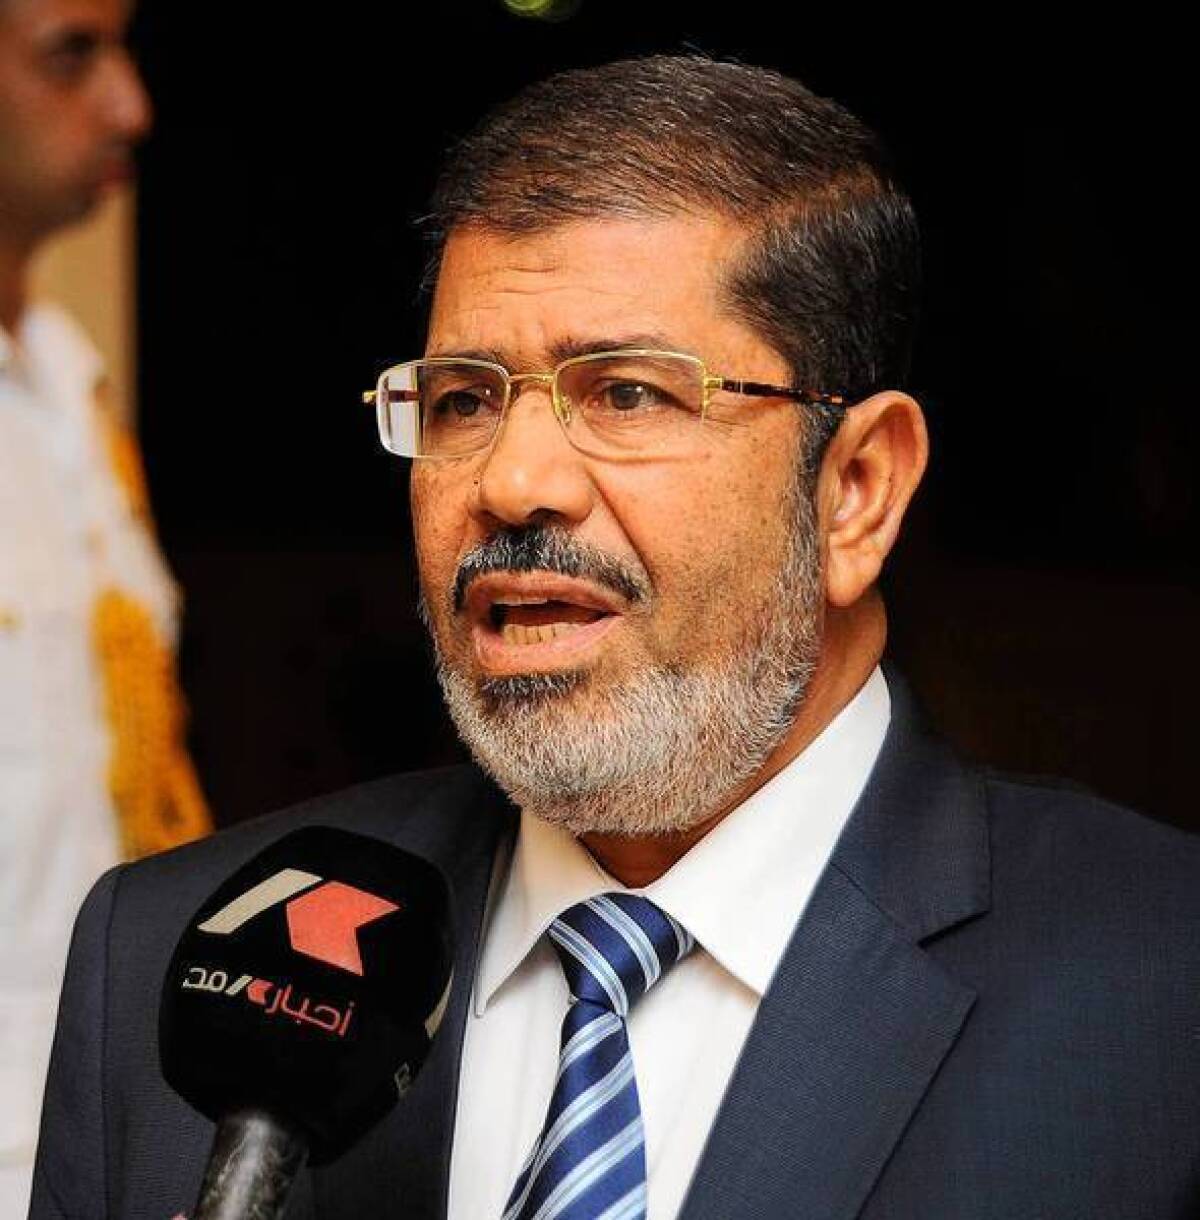 Egyptian President Mohamed Morsi met with Iran's vice president, a visit that gave Iran a diplomatic coup amid sharpening international pressure over its nuclear program and links to Syria.